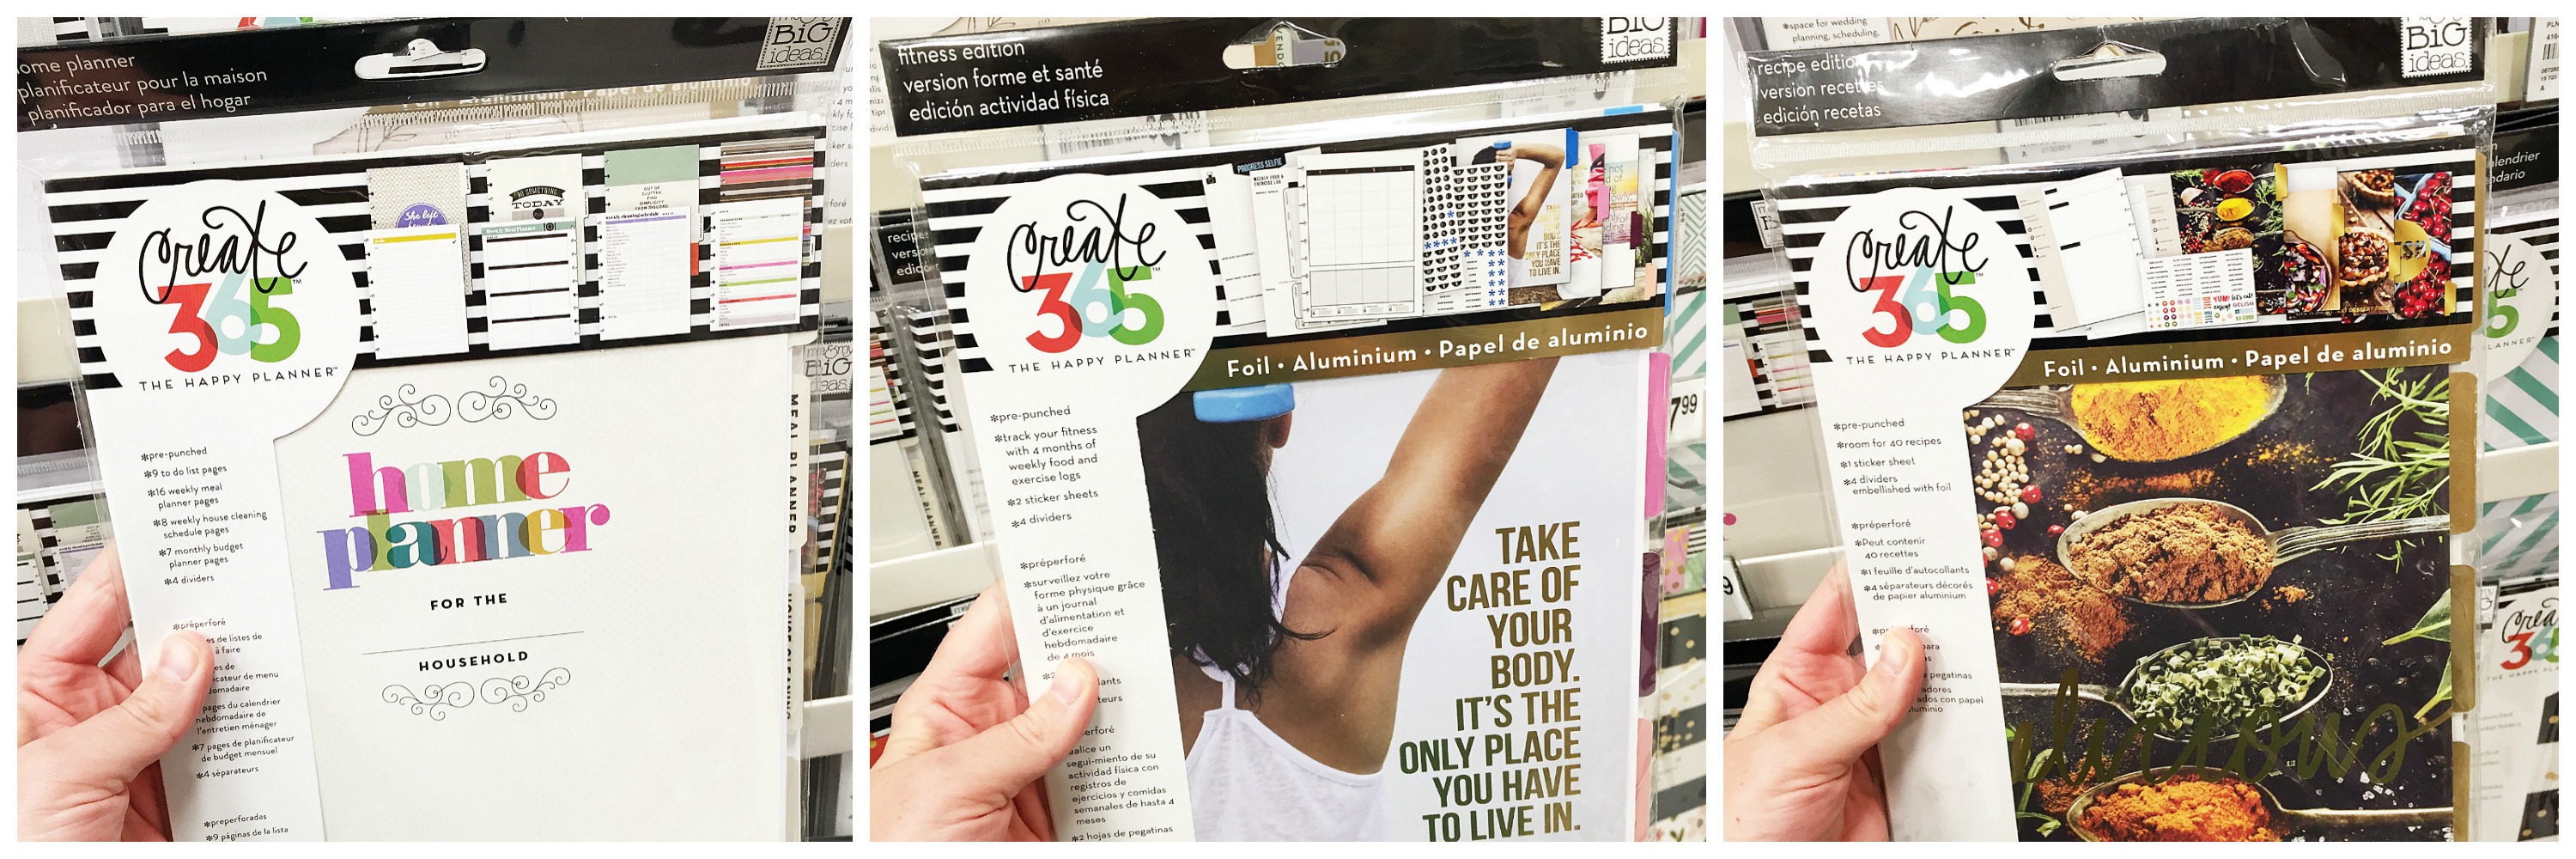 5 ways that using a planner can make your life better. So much great information! #michaelsmakers #spottedatmichaels